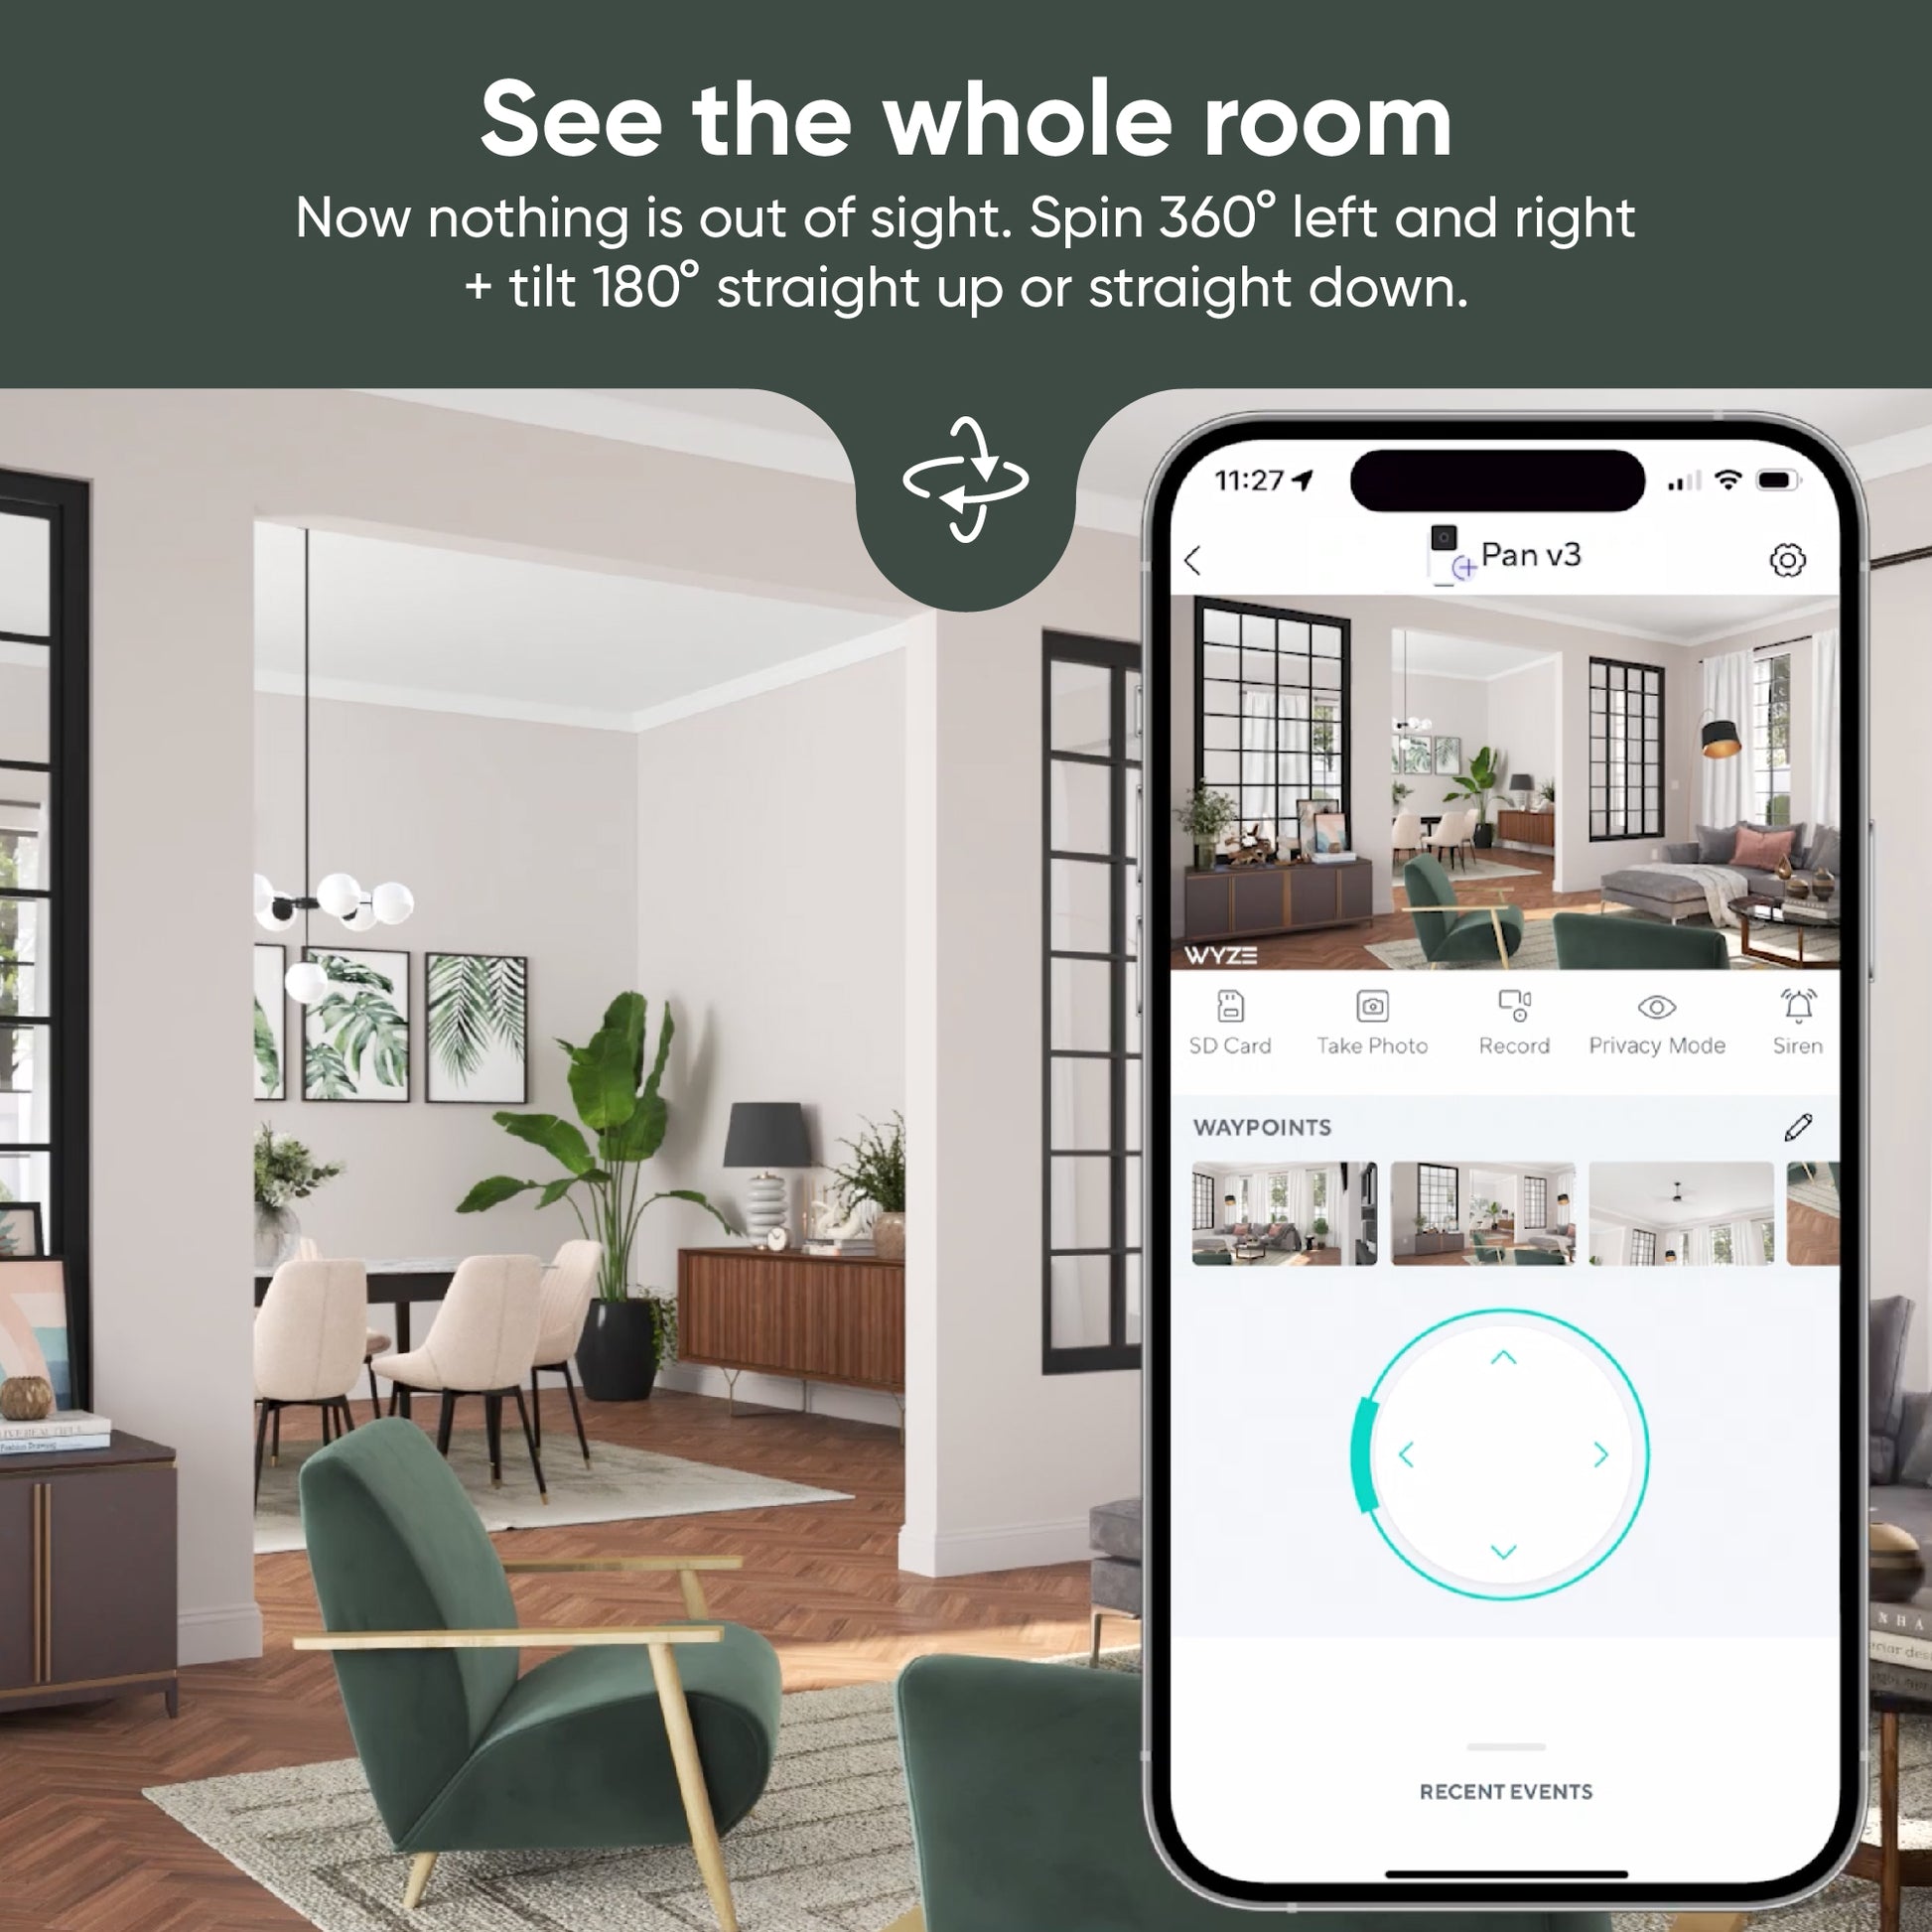 Pan v3 | Remotely 360°, Tilts 180° to view Security Cam, Baby Monitor, Pet Camera Wyze Labs, Inc